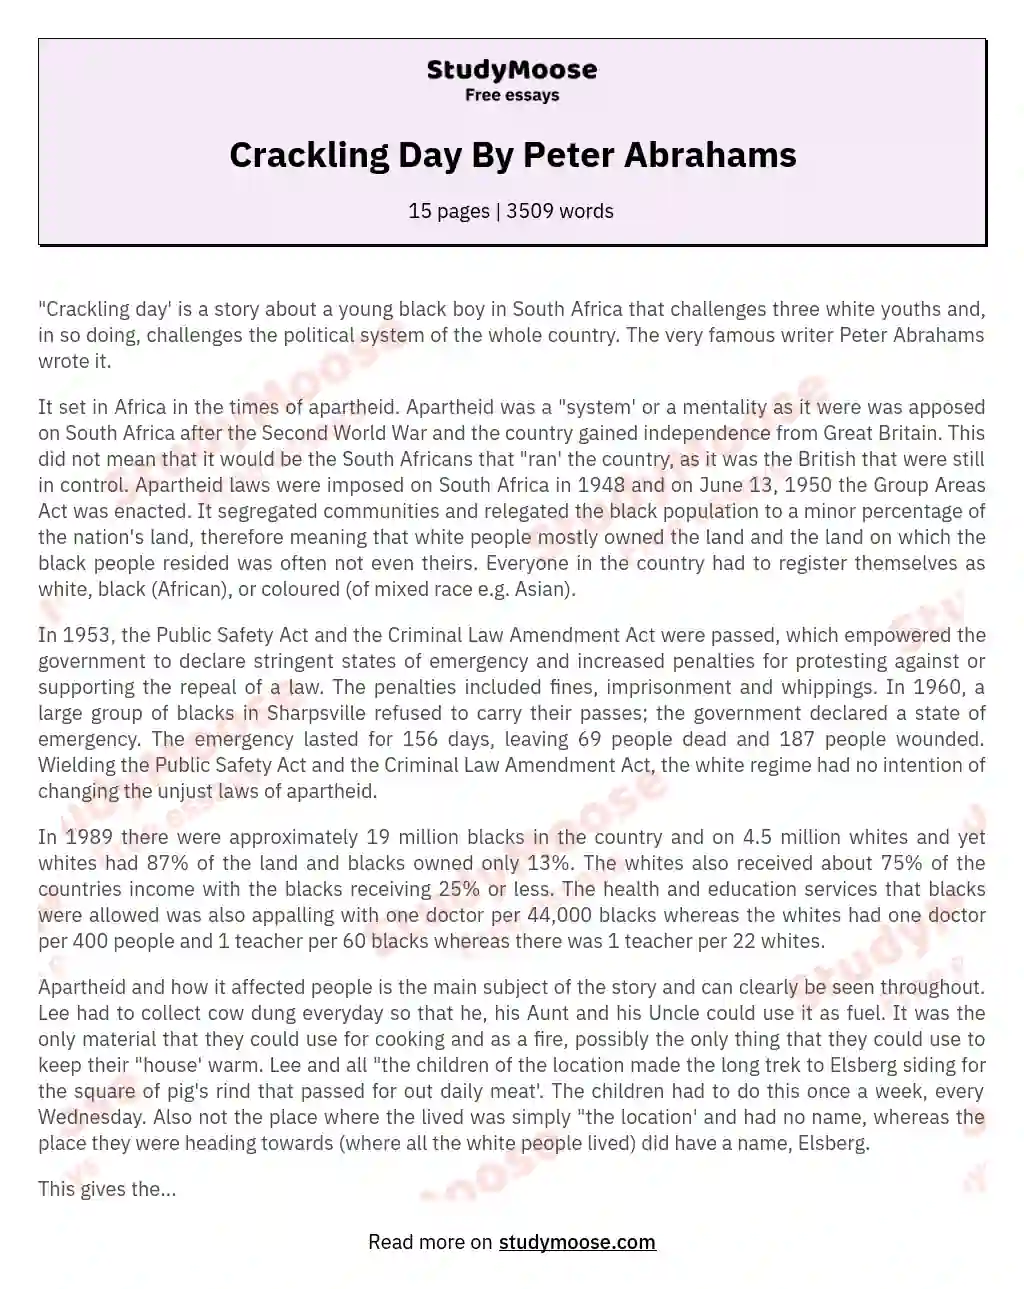 Crackling Day By Peter Abrahams